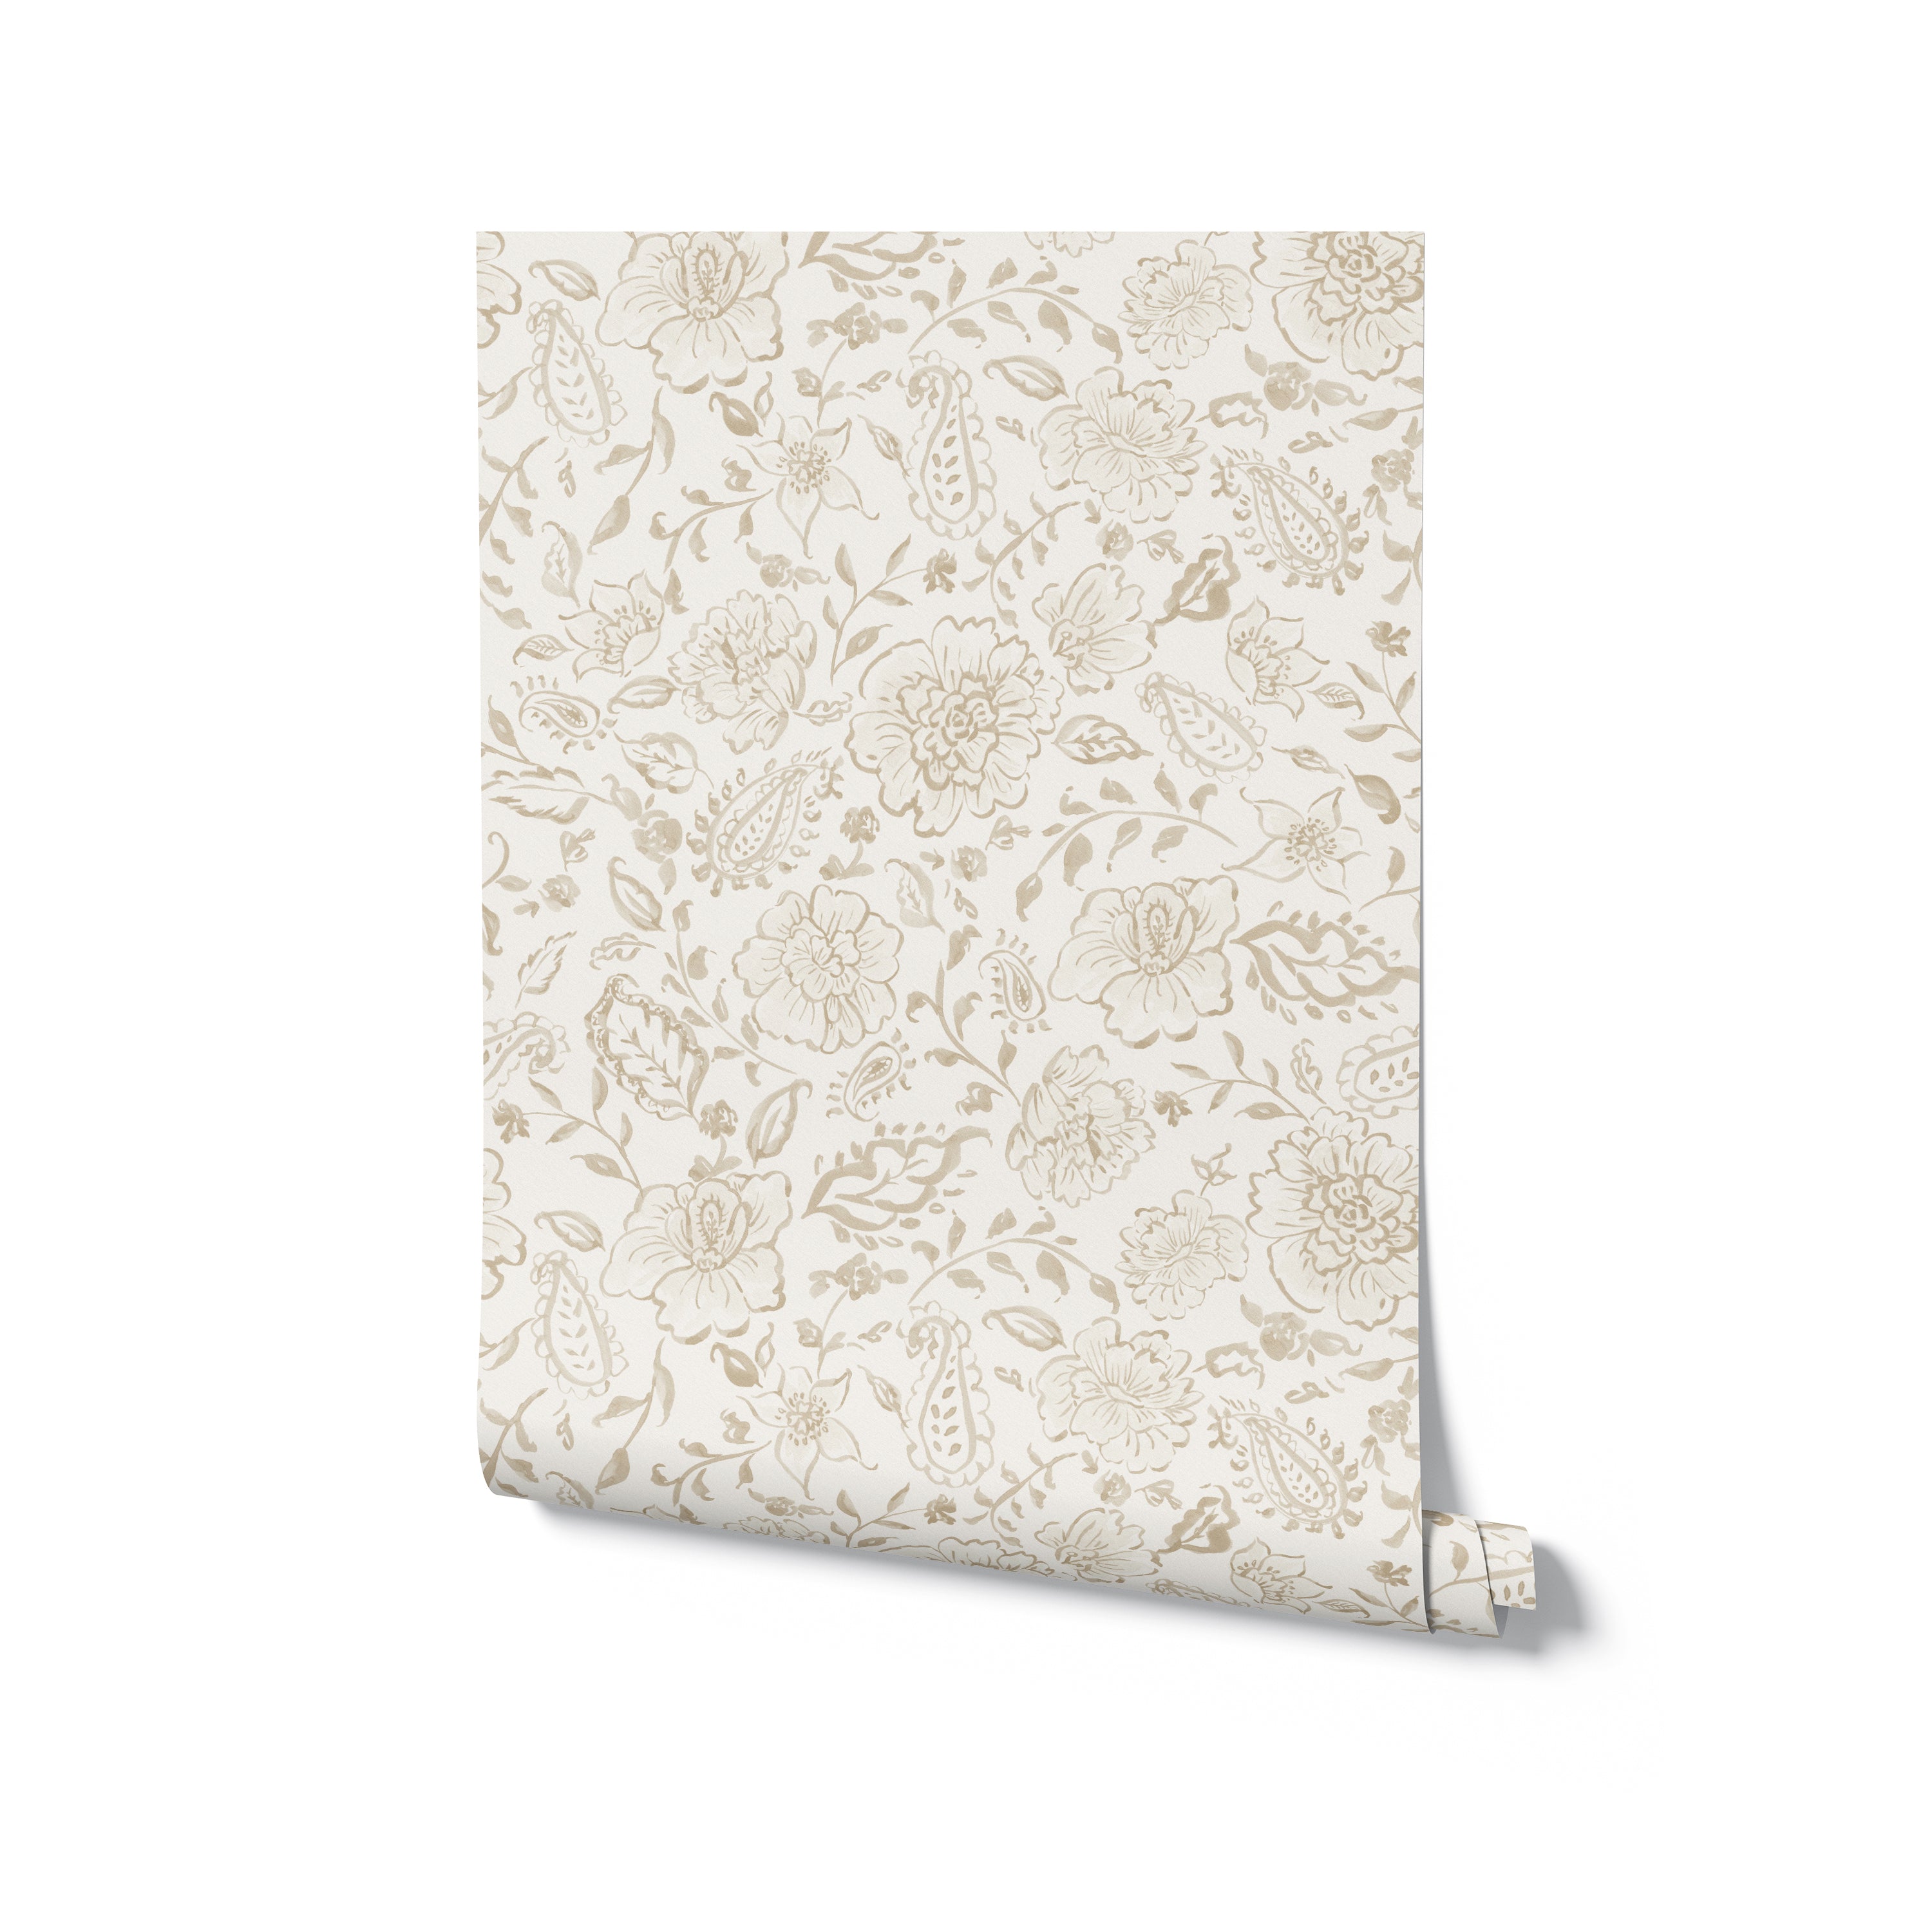 Roll of Watercolour Paisley Wallpaper showcasing detailed floral paisley pattern